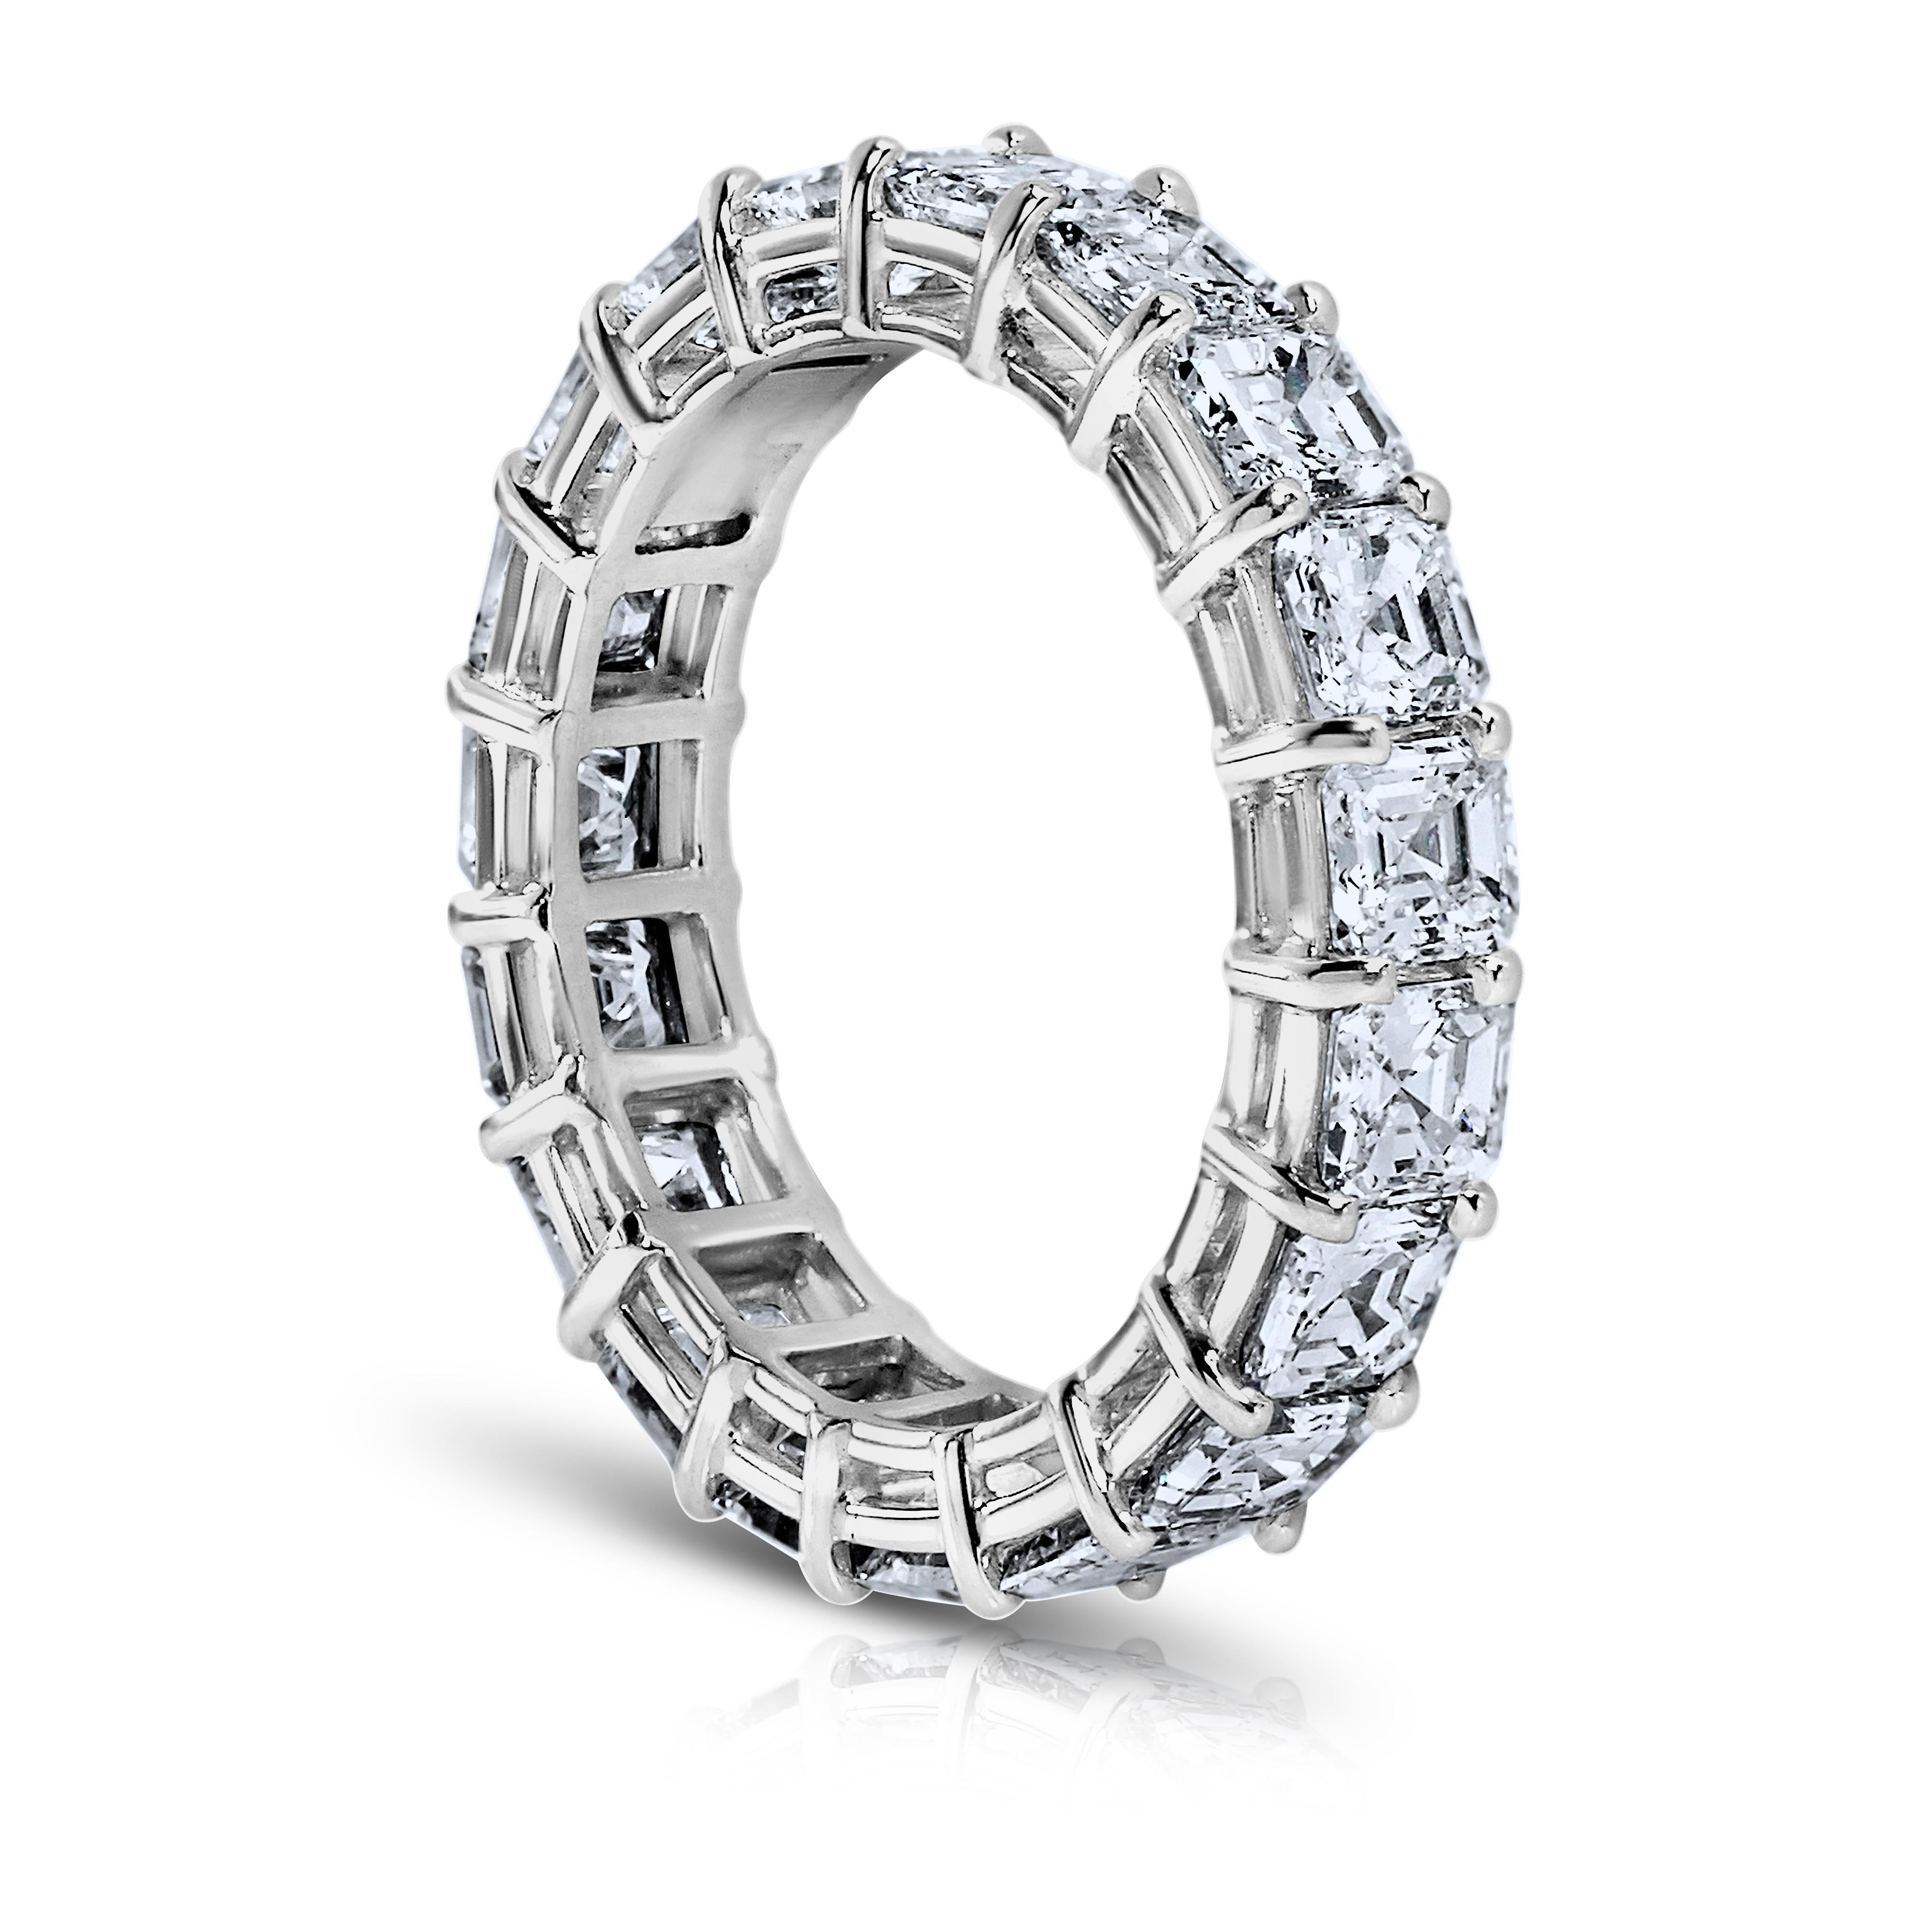 
Asher Cut  diamond ring platinum eternity band shared prong style with a gallery.
18 perfectly matched diamonds weighing a minimum of 5.40 cts. G.I.A certificates for each diamond . Ranging from D-F in color . VVS1-VS2 in clarity .
Lab tested